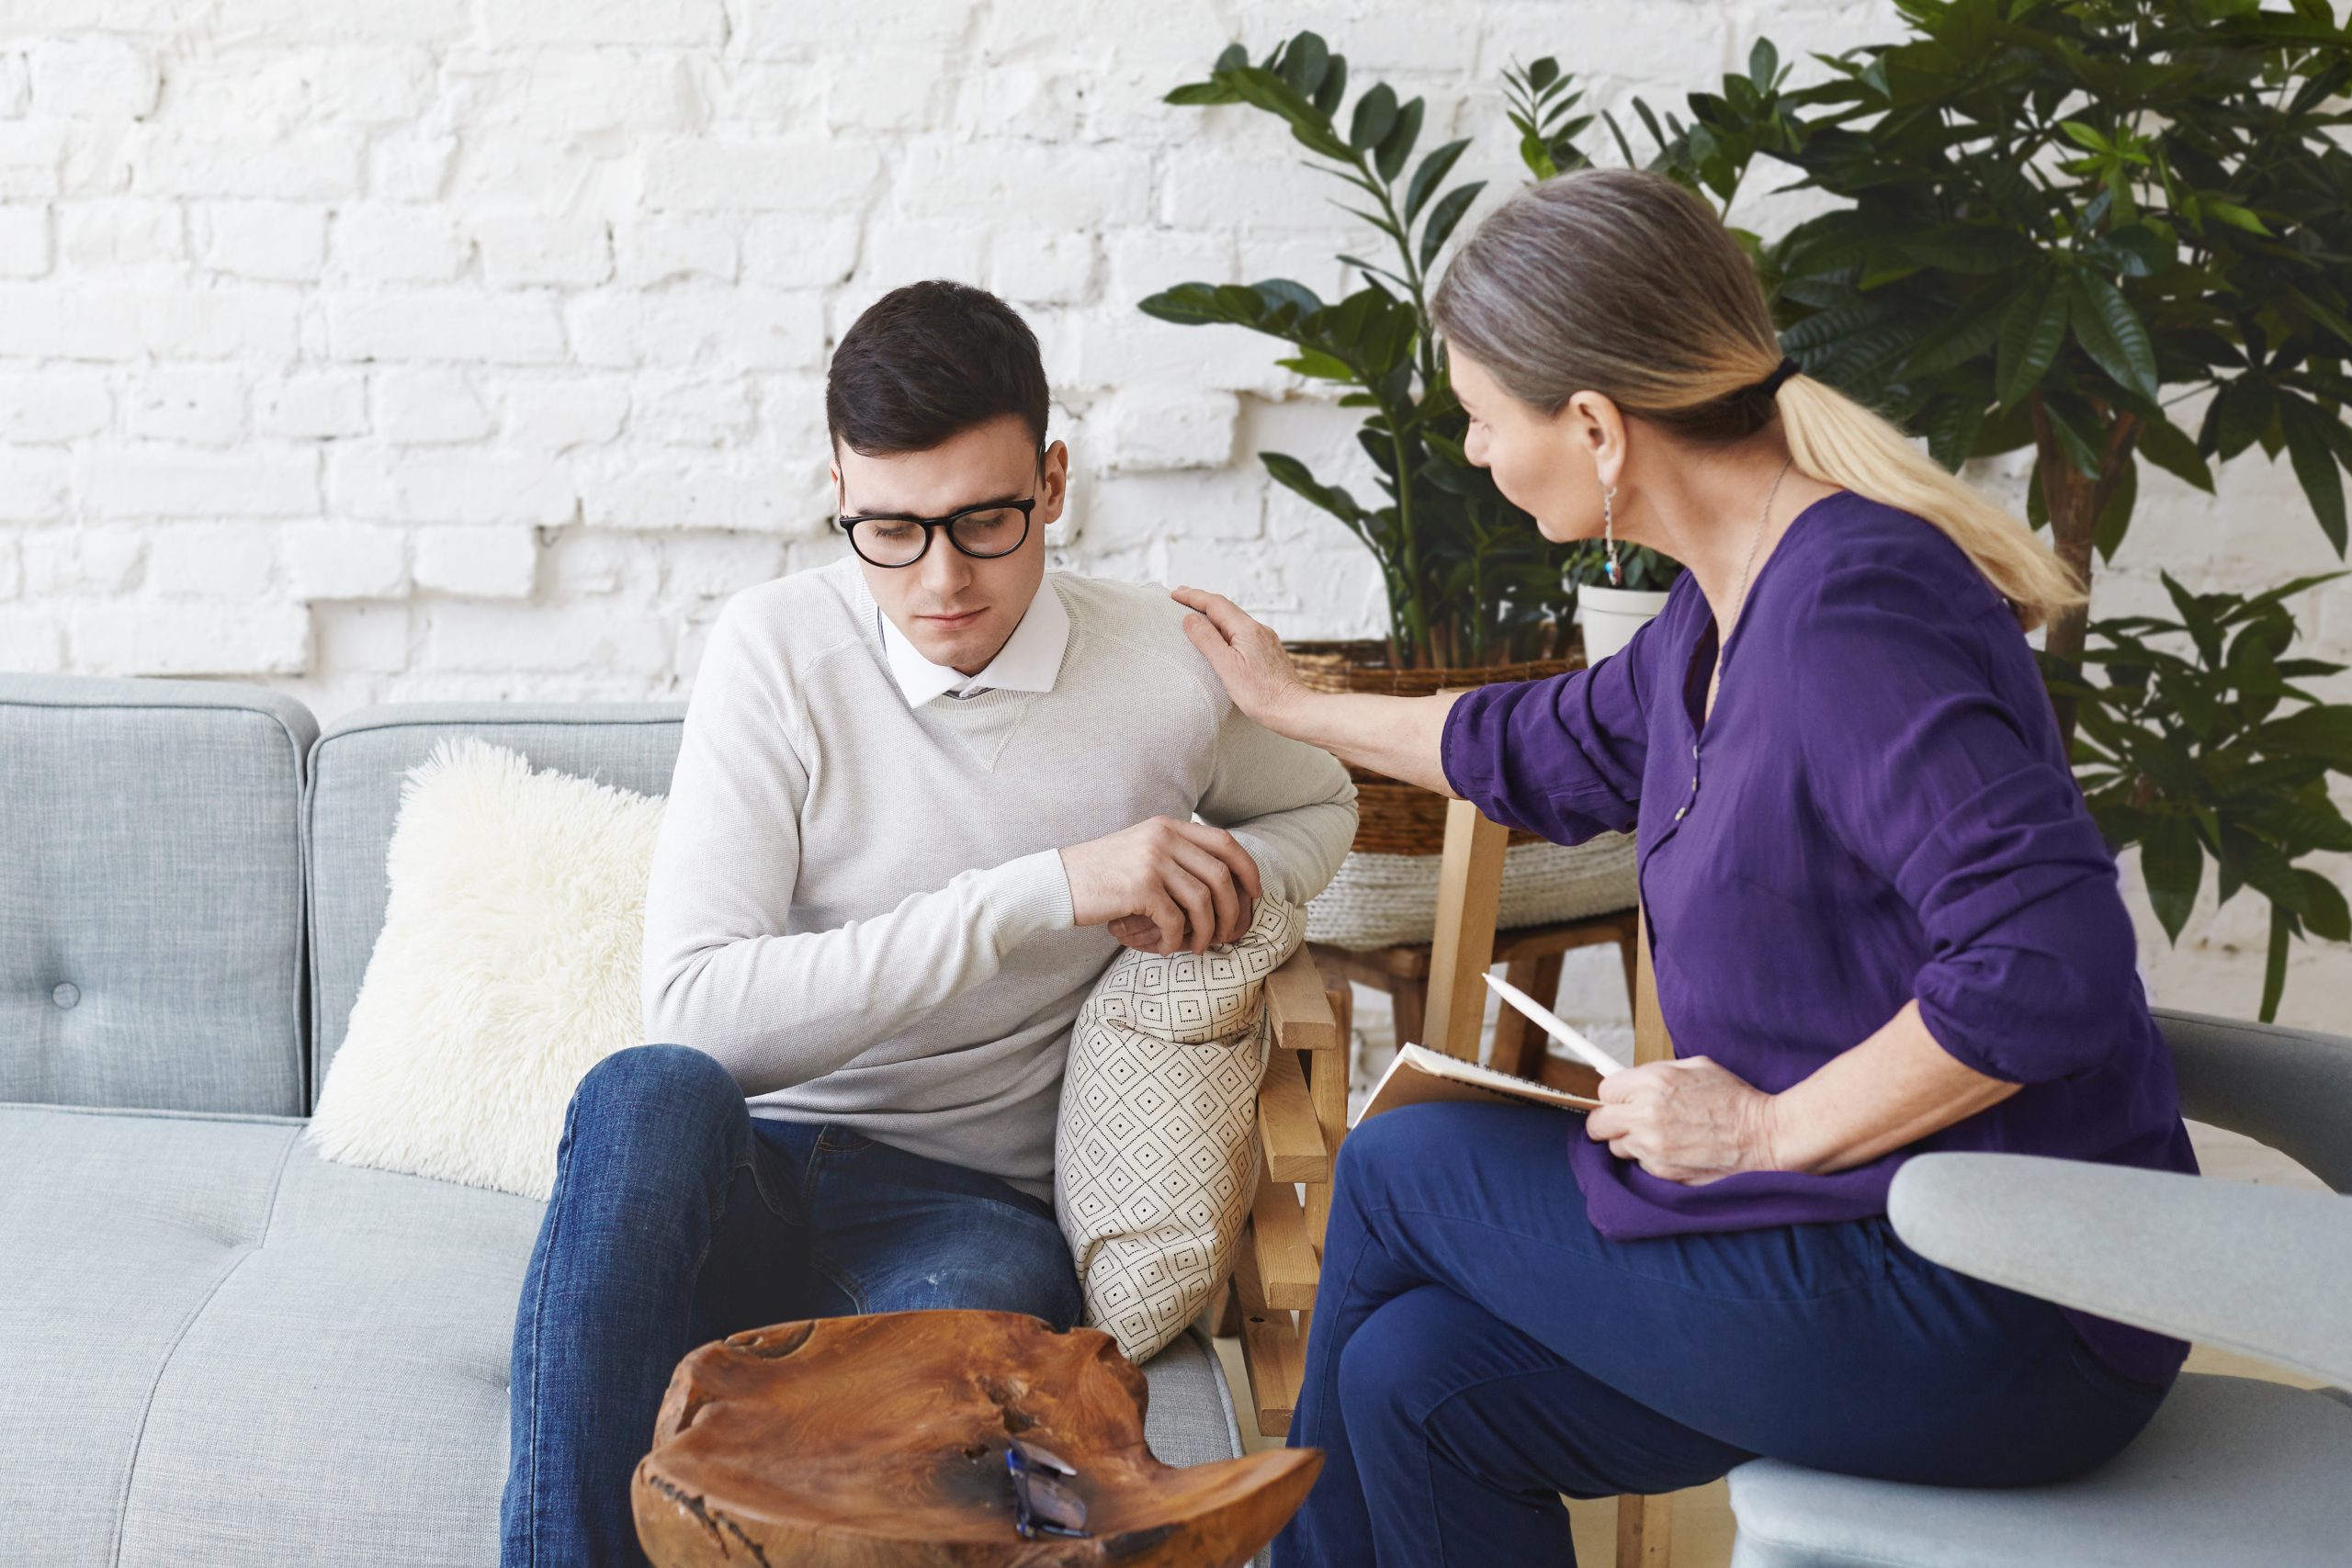 Therapists will help clients understand how their trauma affects their physical health. Online talk therapy helps overcome psychological challenges.